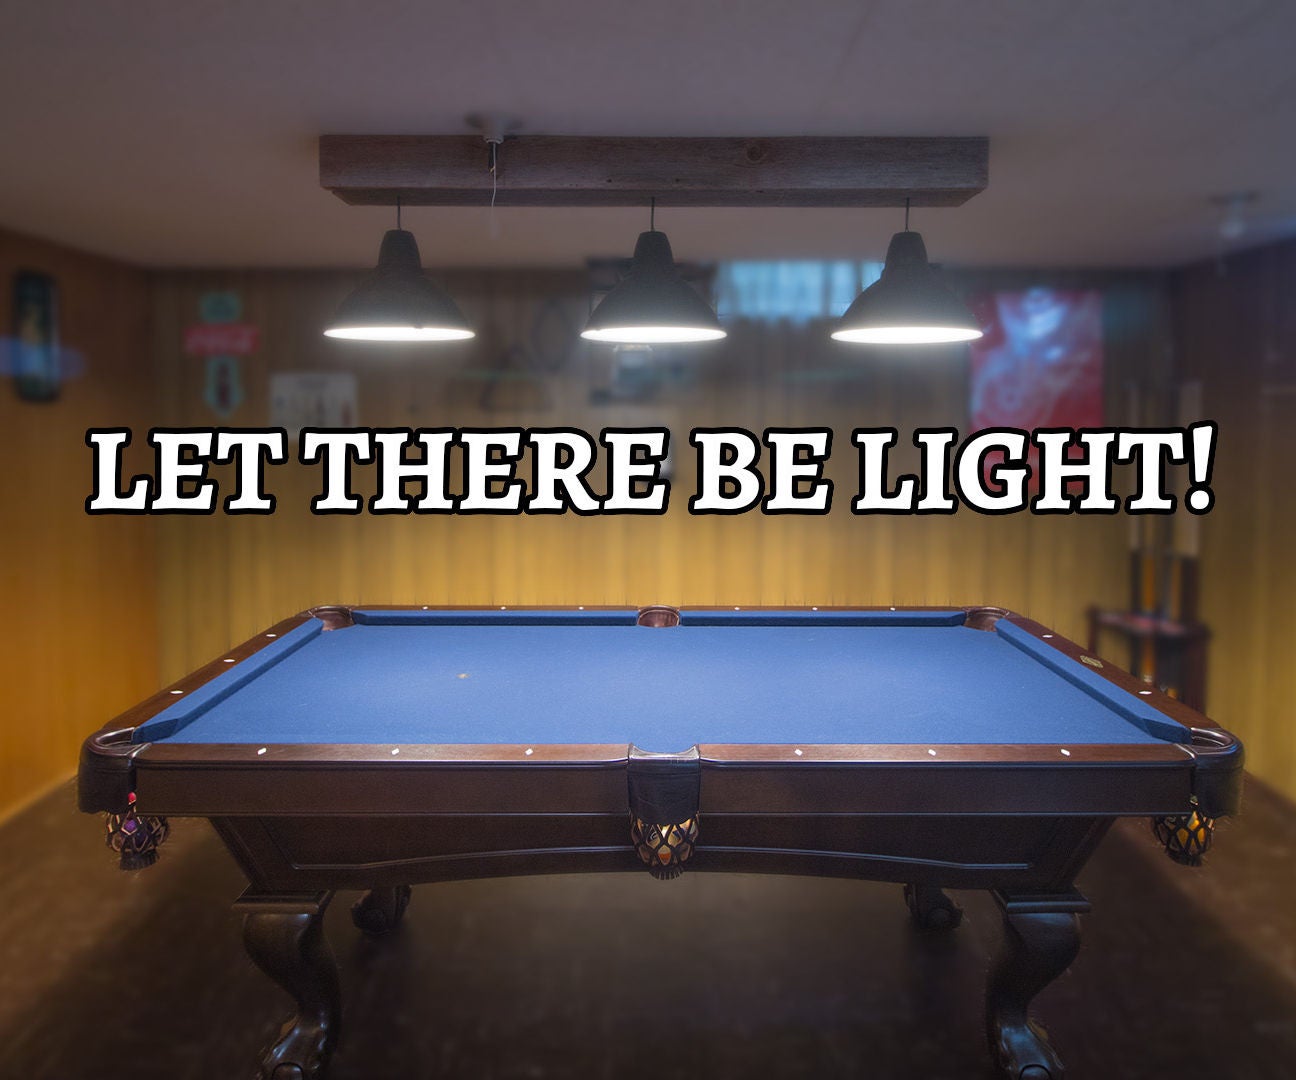 Farmhouse Rustic Pool Table Light With Recycled/Reclaimed Materials